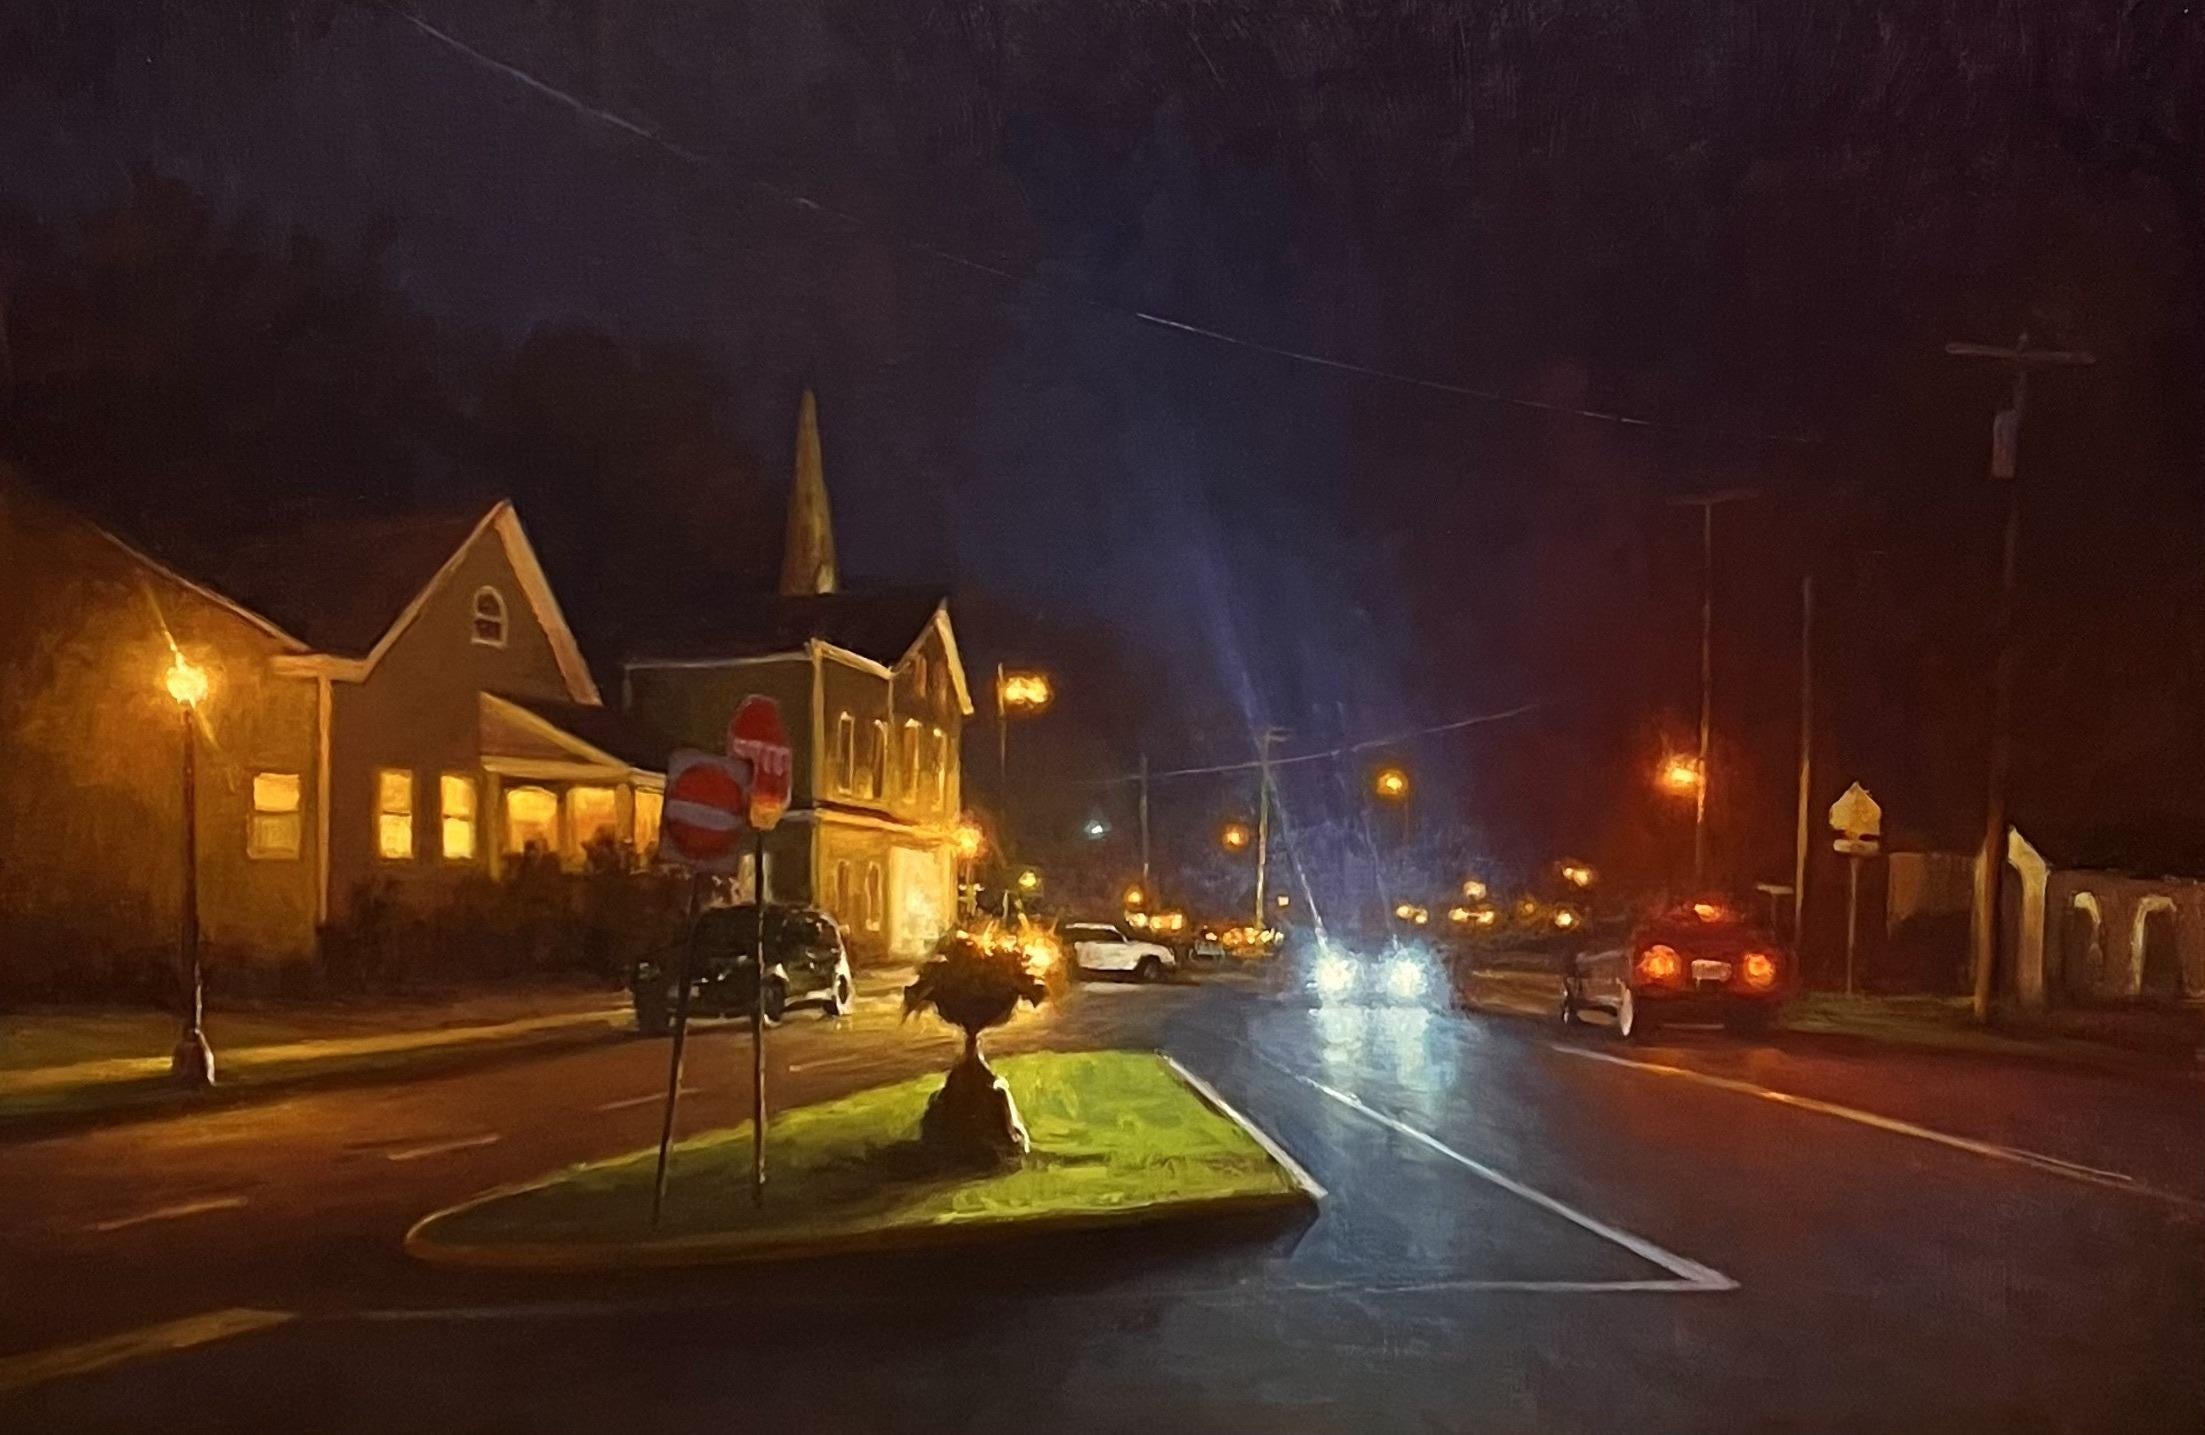 Division Street at Night - 2023, American realist nocturne by Carl Bretzke